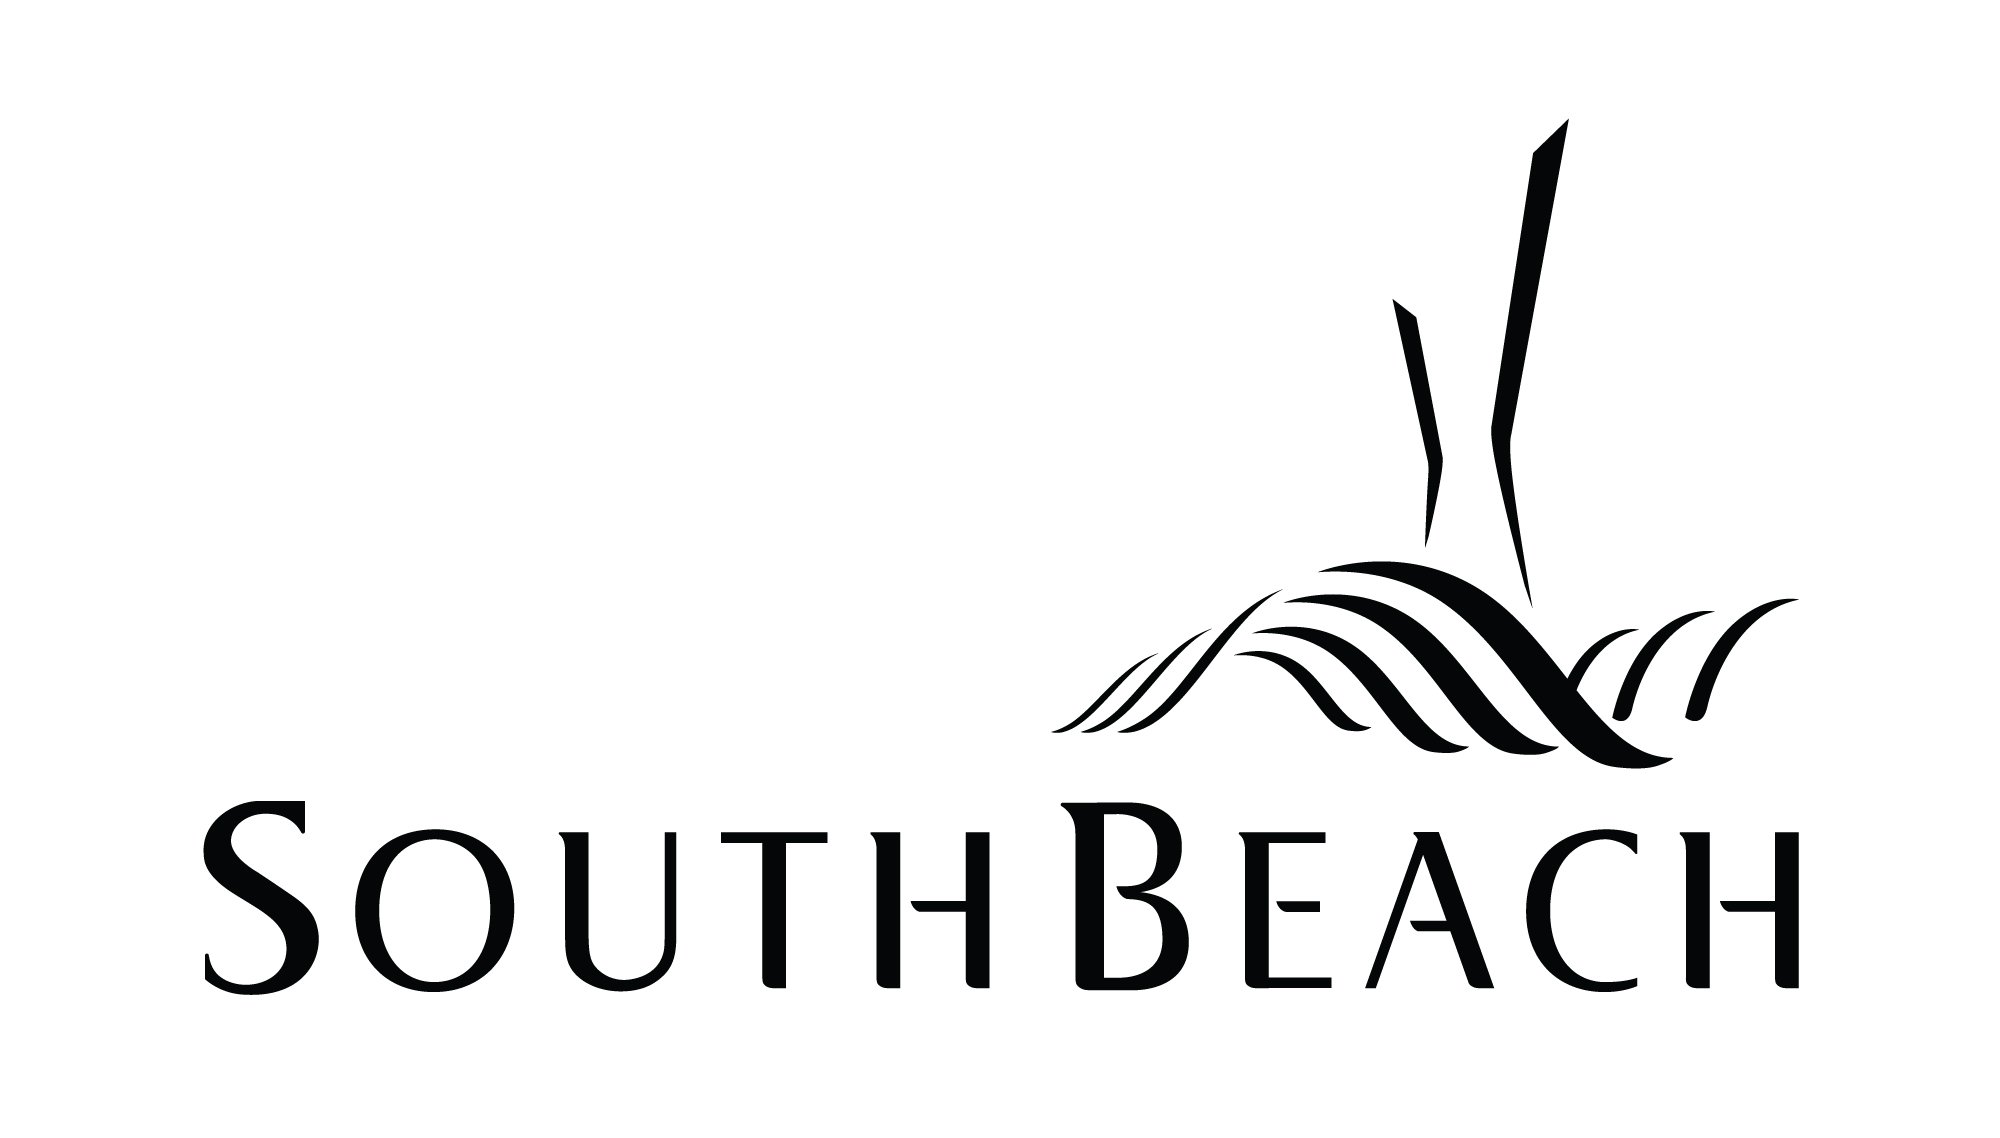 Image of South Beach